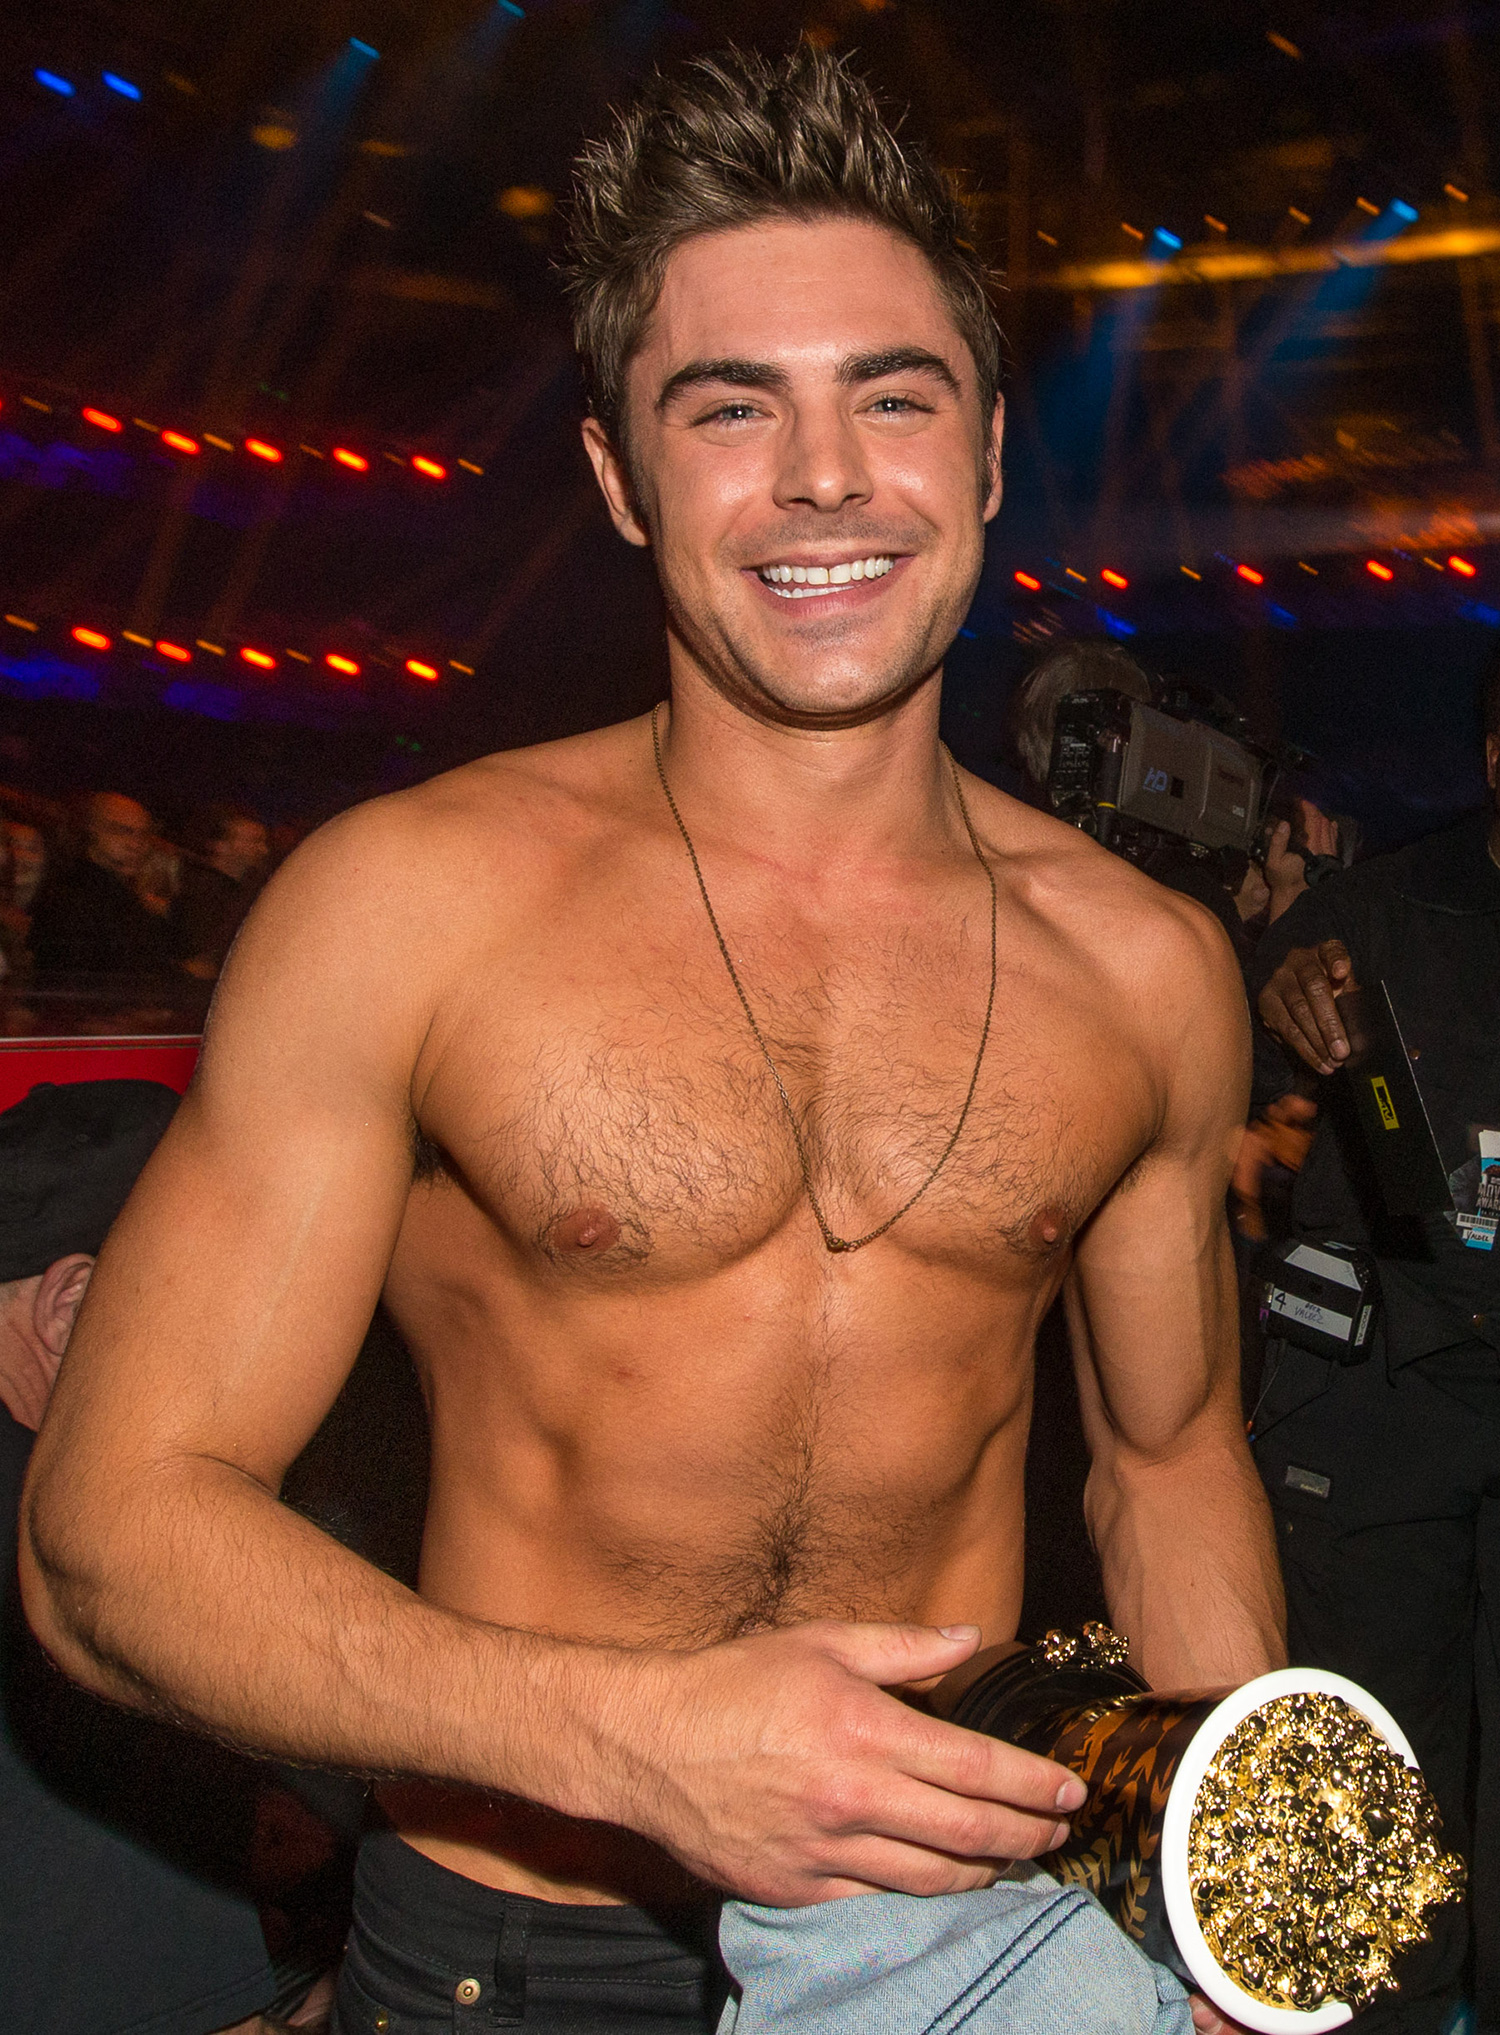 crissy sheen add naked pictures of zac efron photo